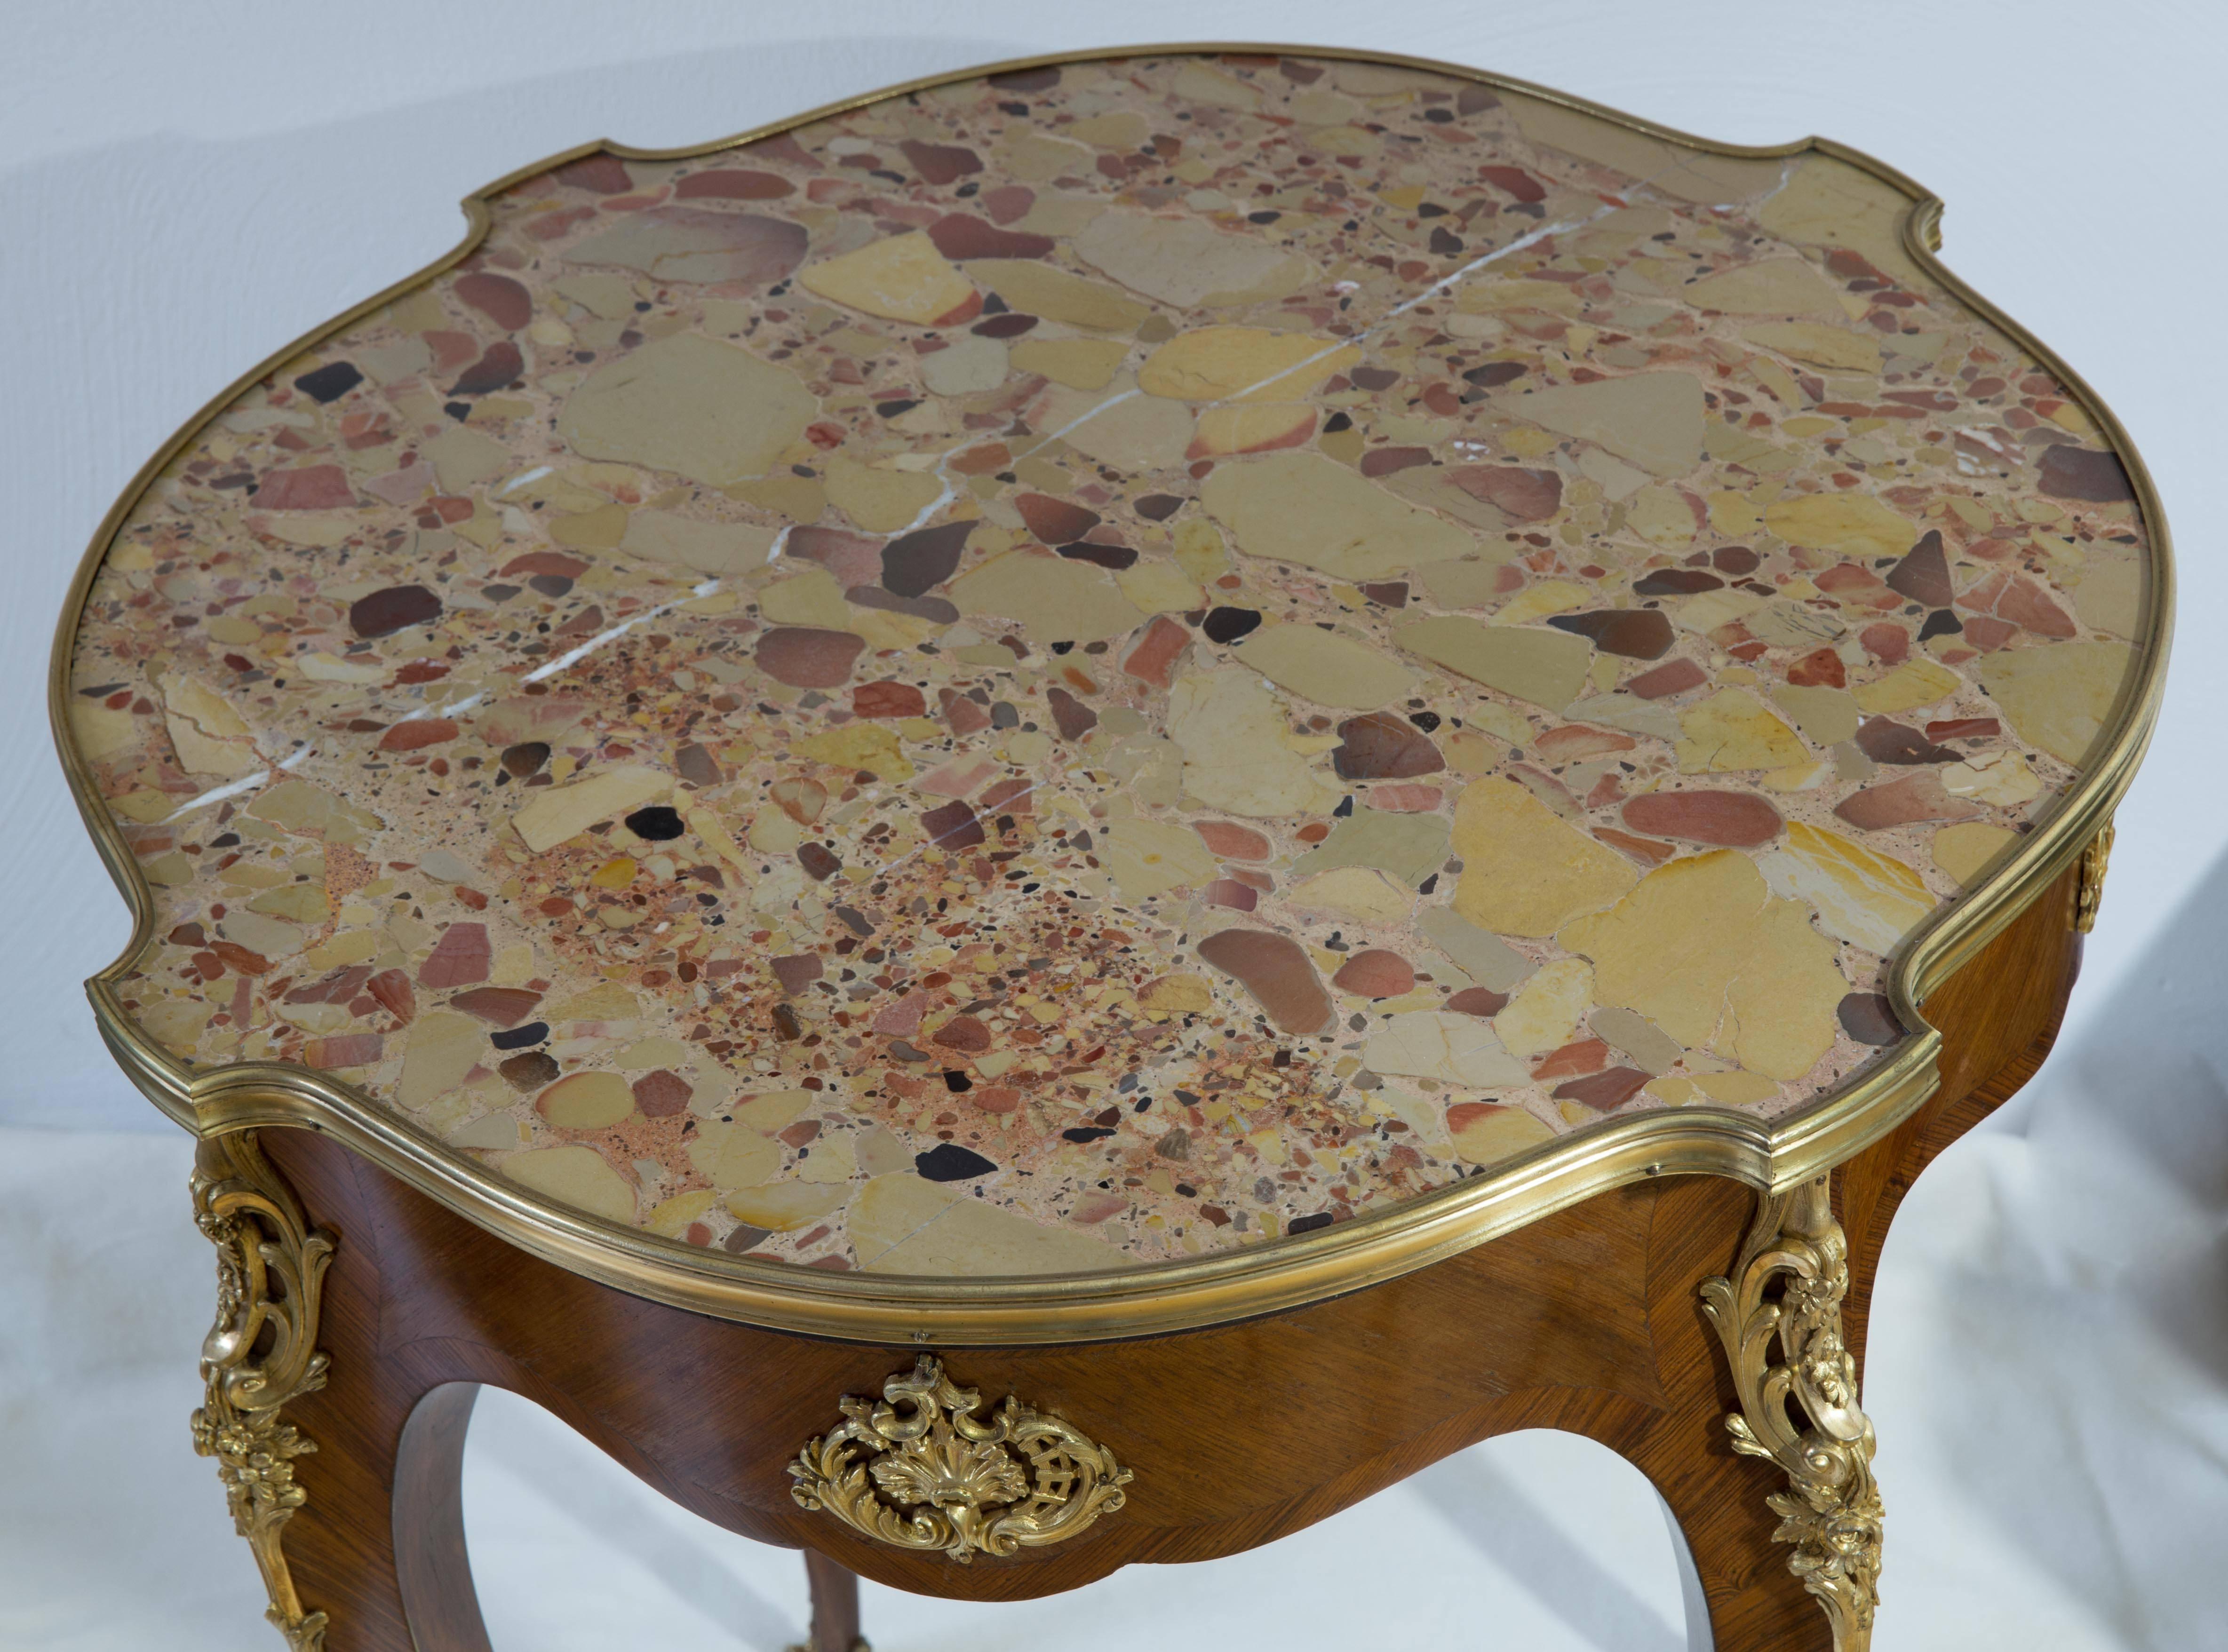 Rococo Revival Guéridon Side Table French Rococo, Louis XVI style, gilded bronzes, marble top